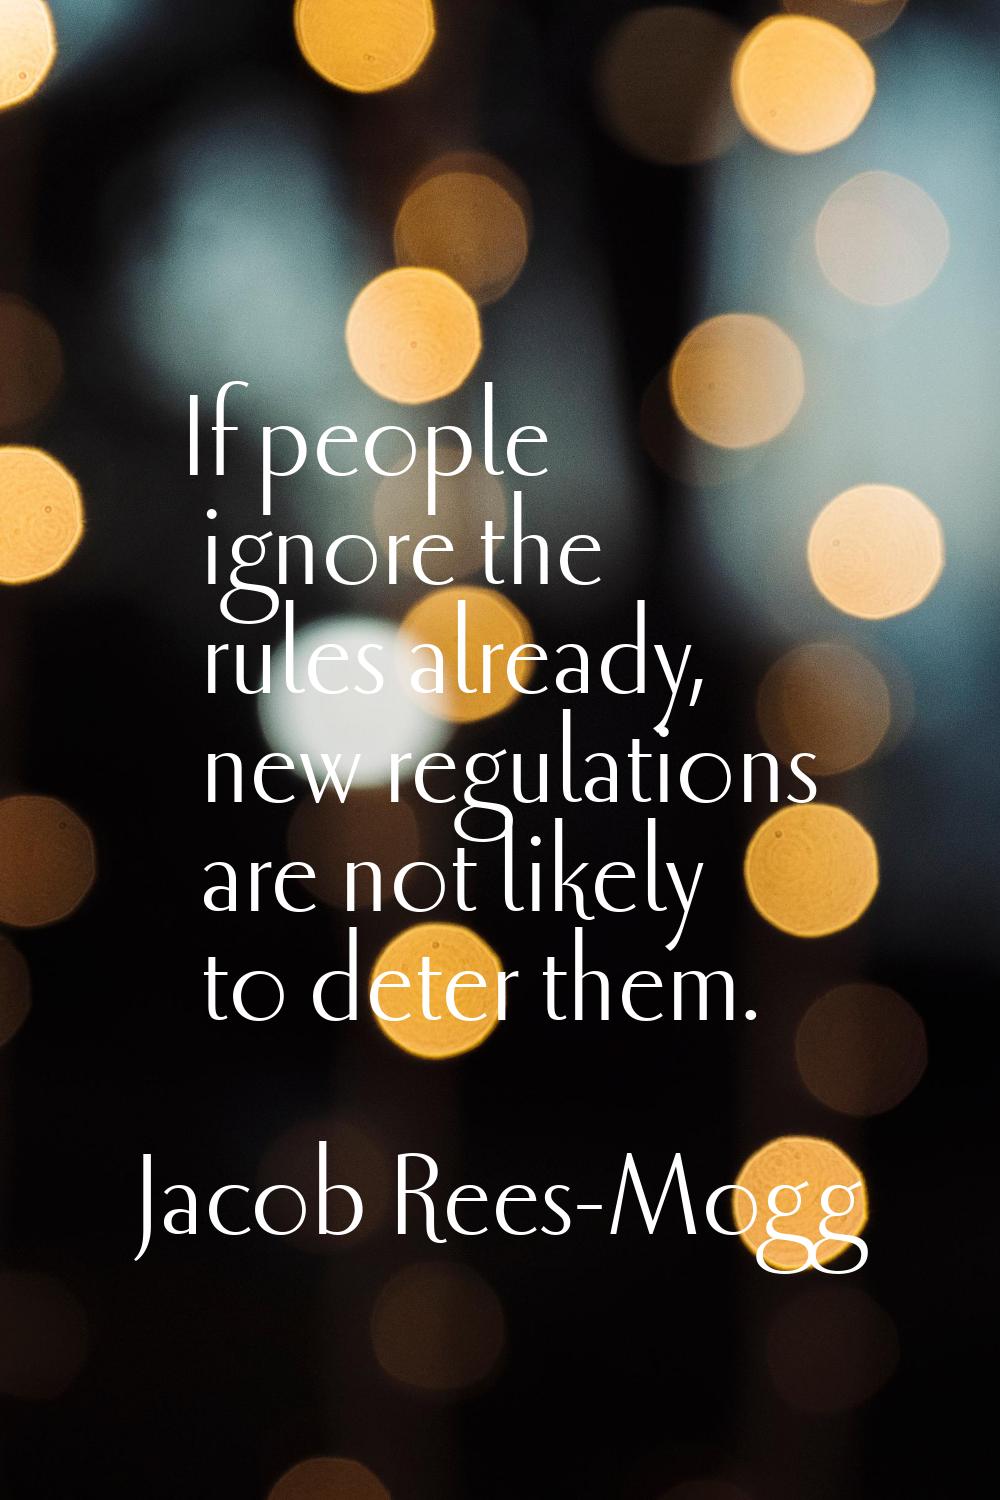 If people ignore the rules already, new regulations are not likely to deter them.